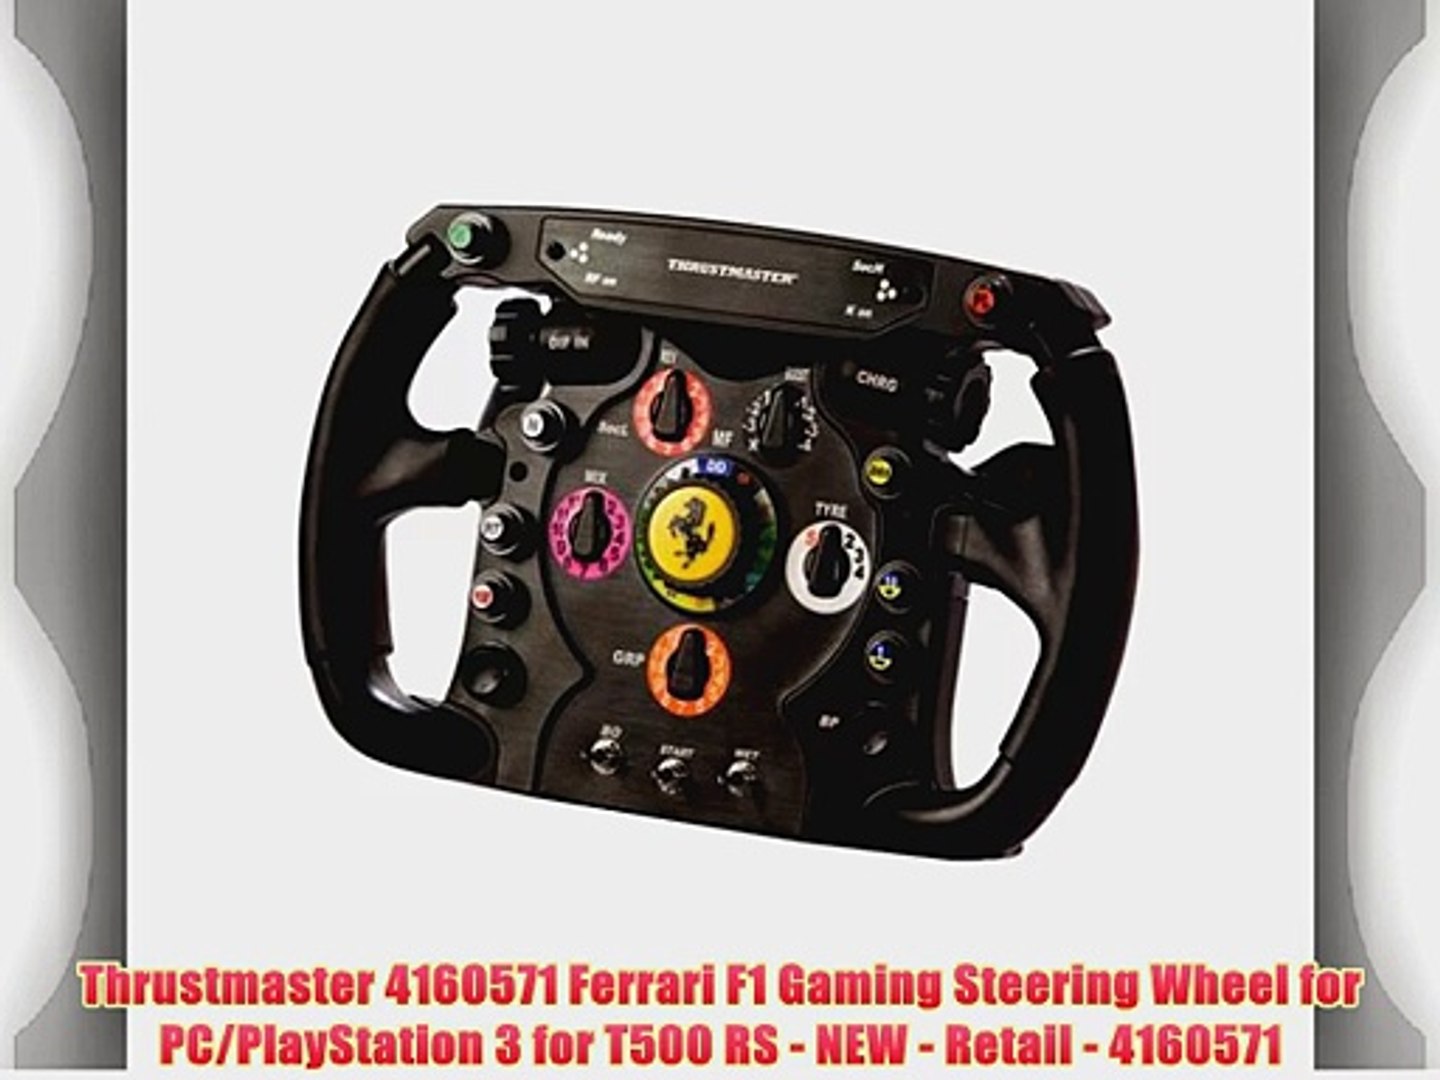 Thrustmaster 4160571 Ferrari F1 Gaming Steering Wheel For Pcplaystation 3 For T500 Rs New